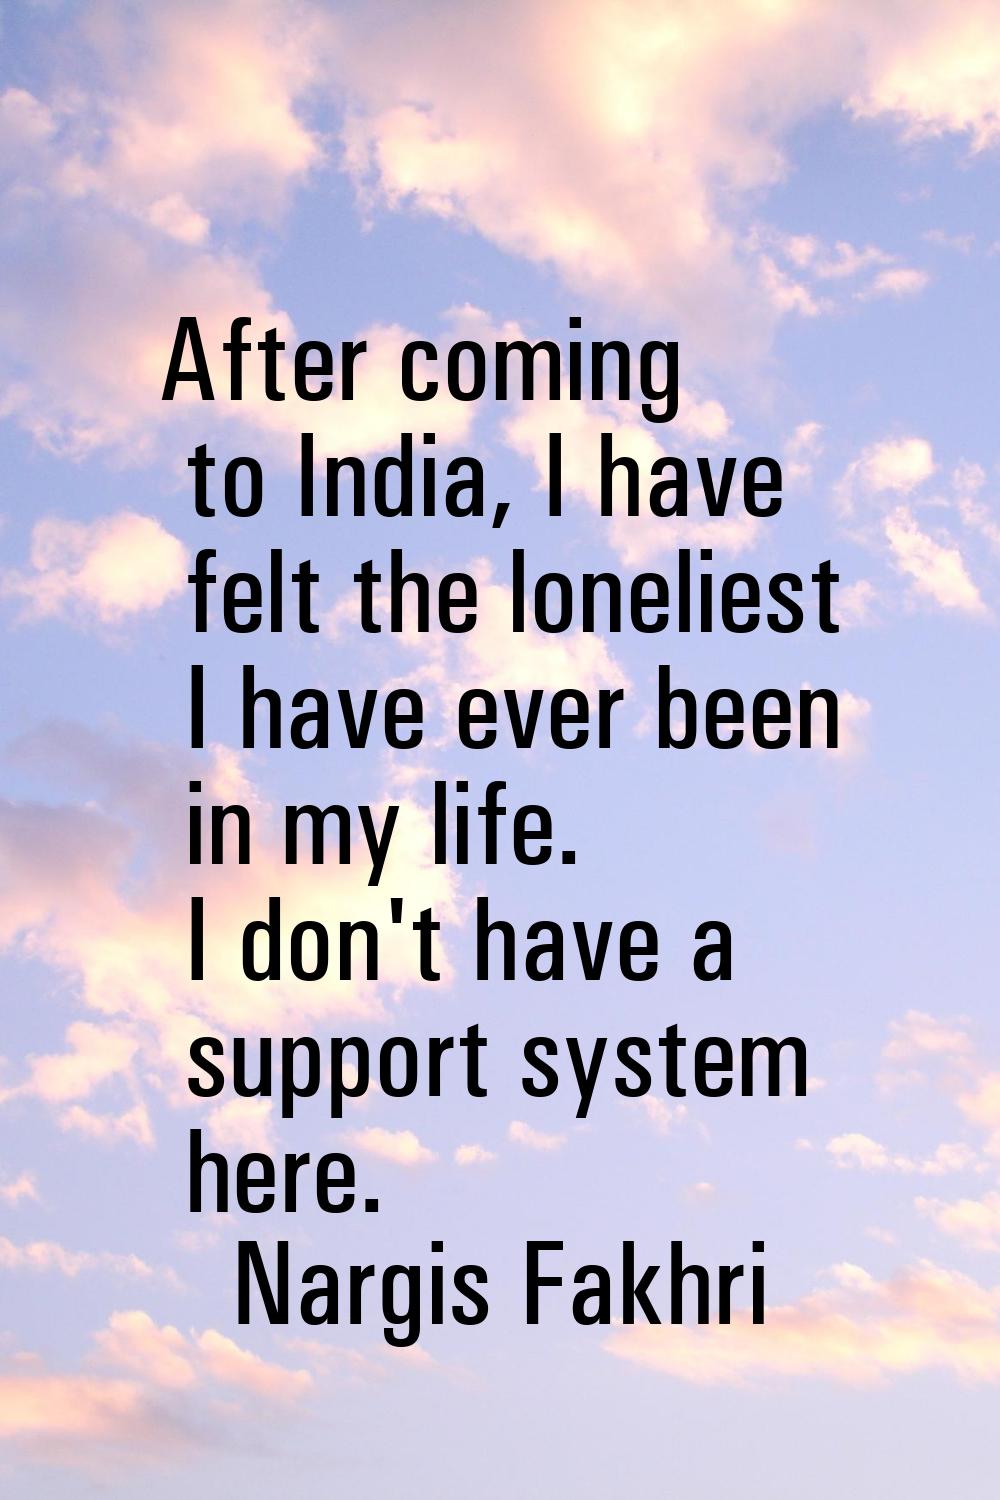 After coming to India, I have felt the loneliest I have ever been in my life. I don't have a suppor